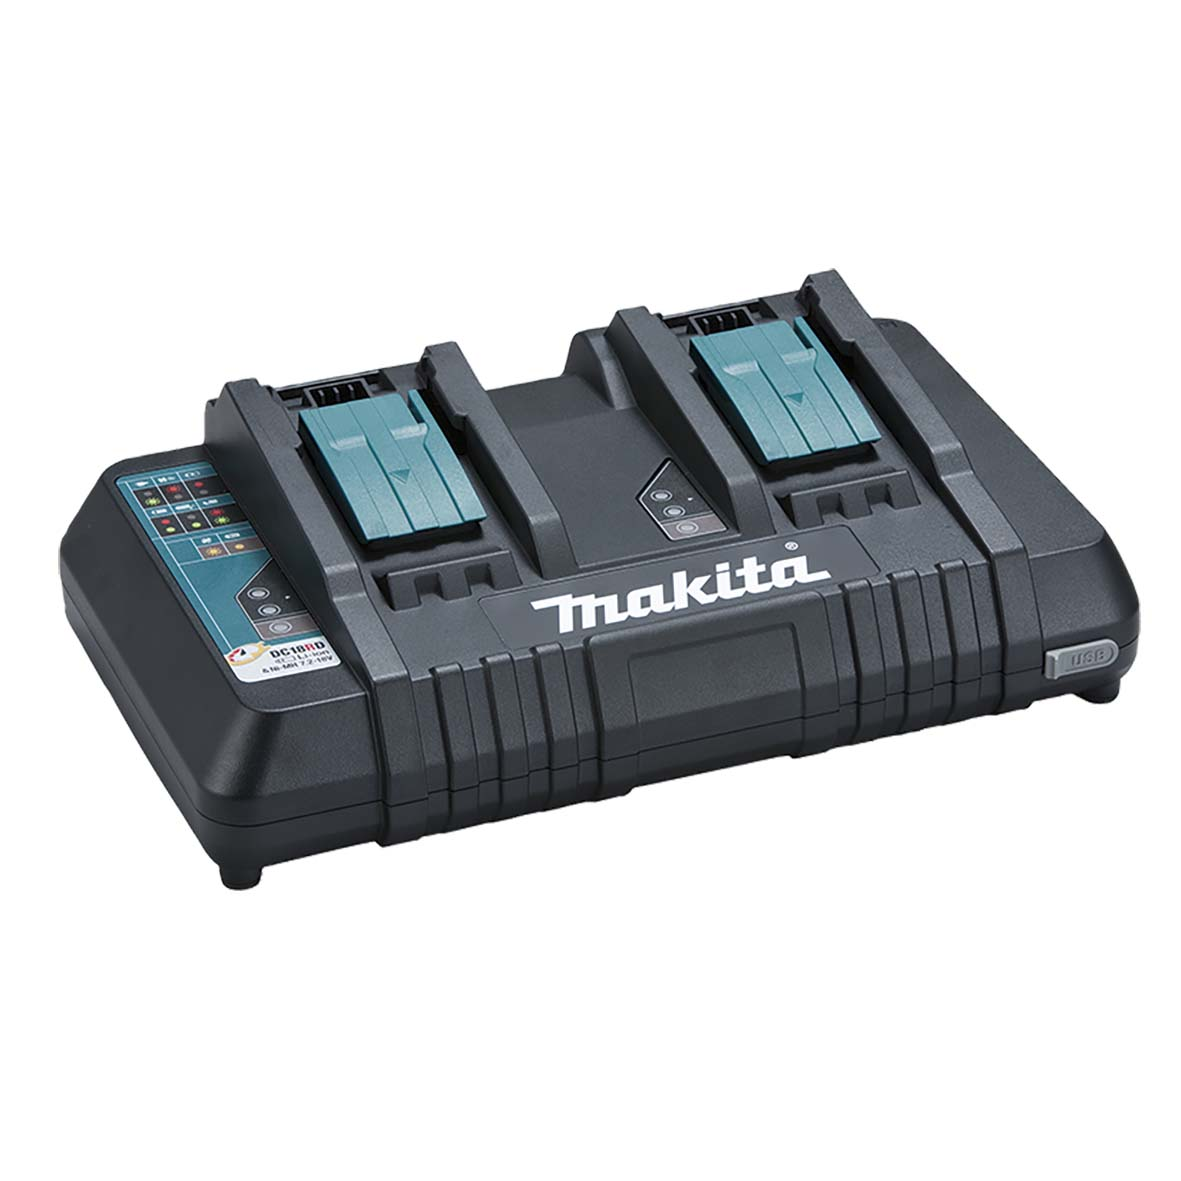 18V Same Time Dual Port Battery Charger DC18RD by Makita